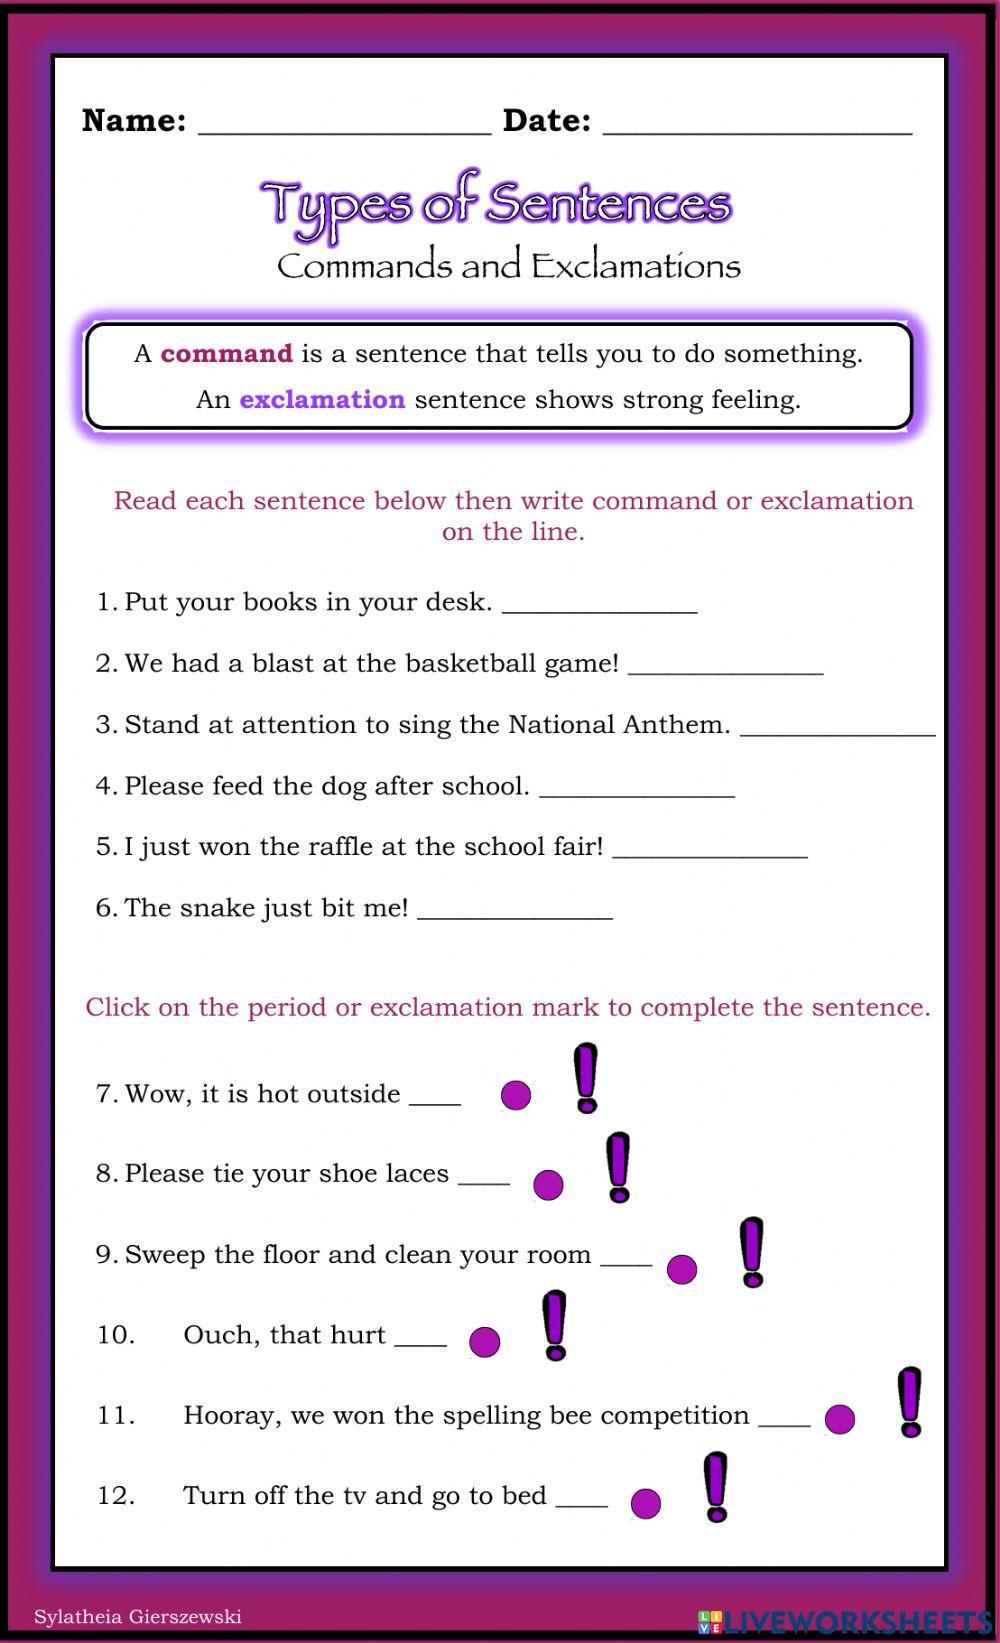 Types of Sentences (commands and exclamations)